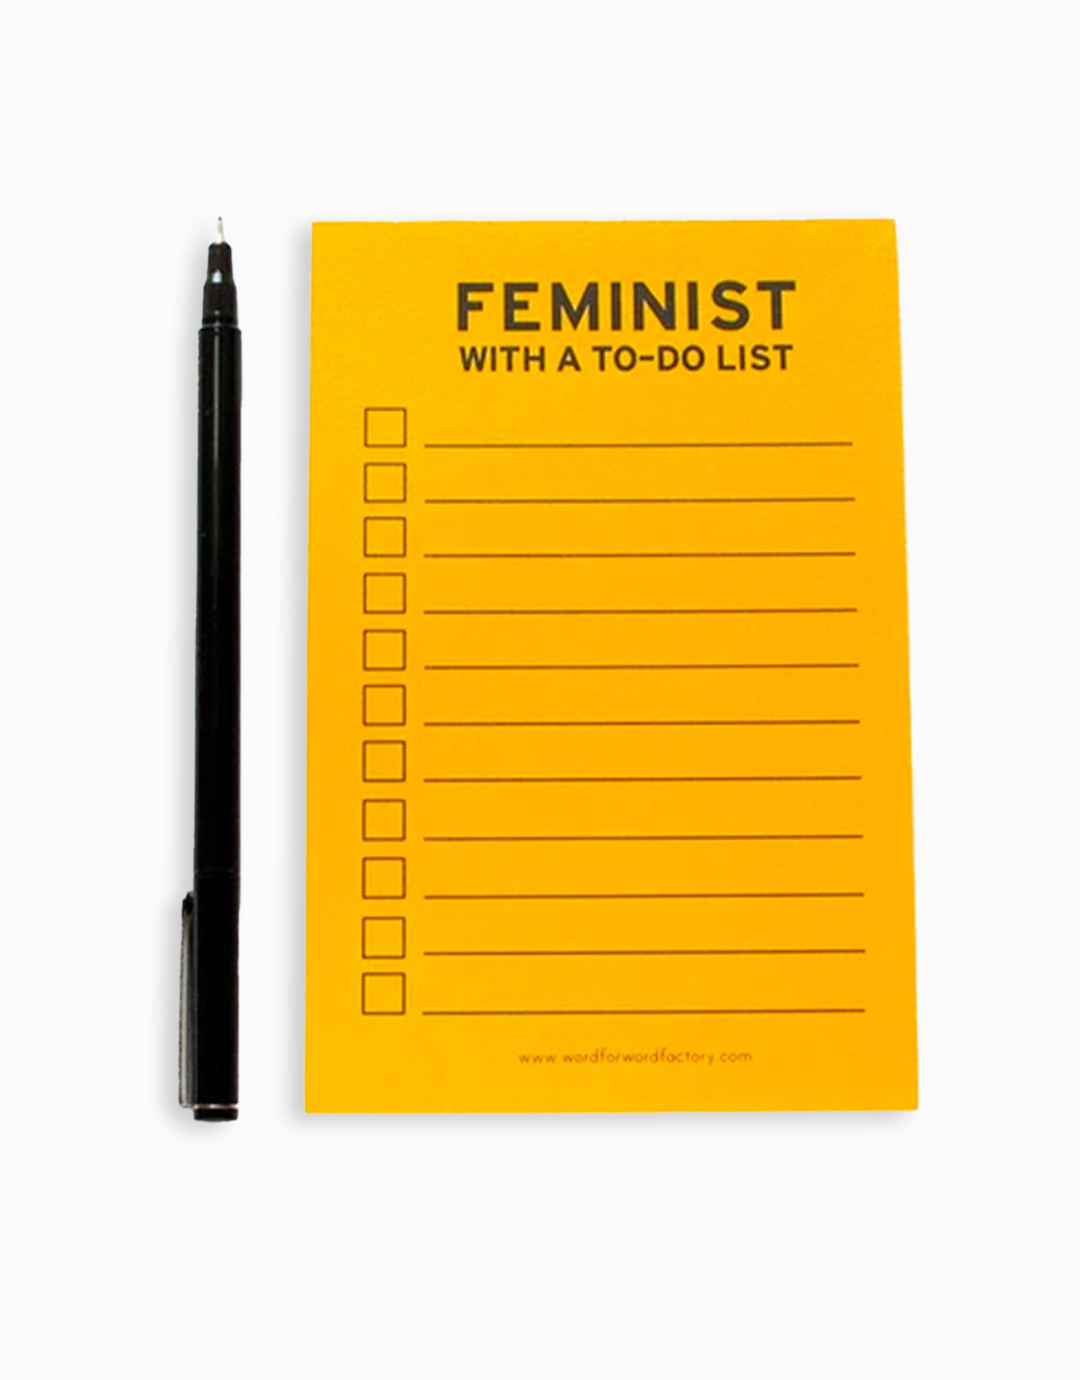 Feminist With A To-Do List Notepad